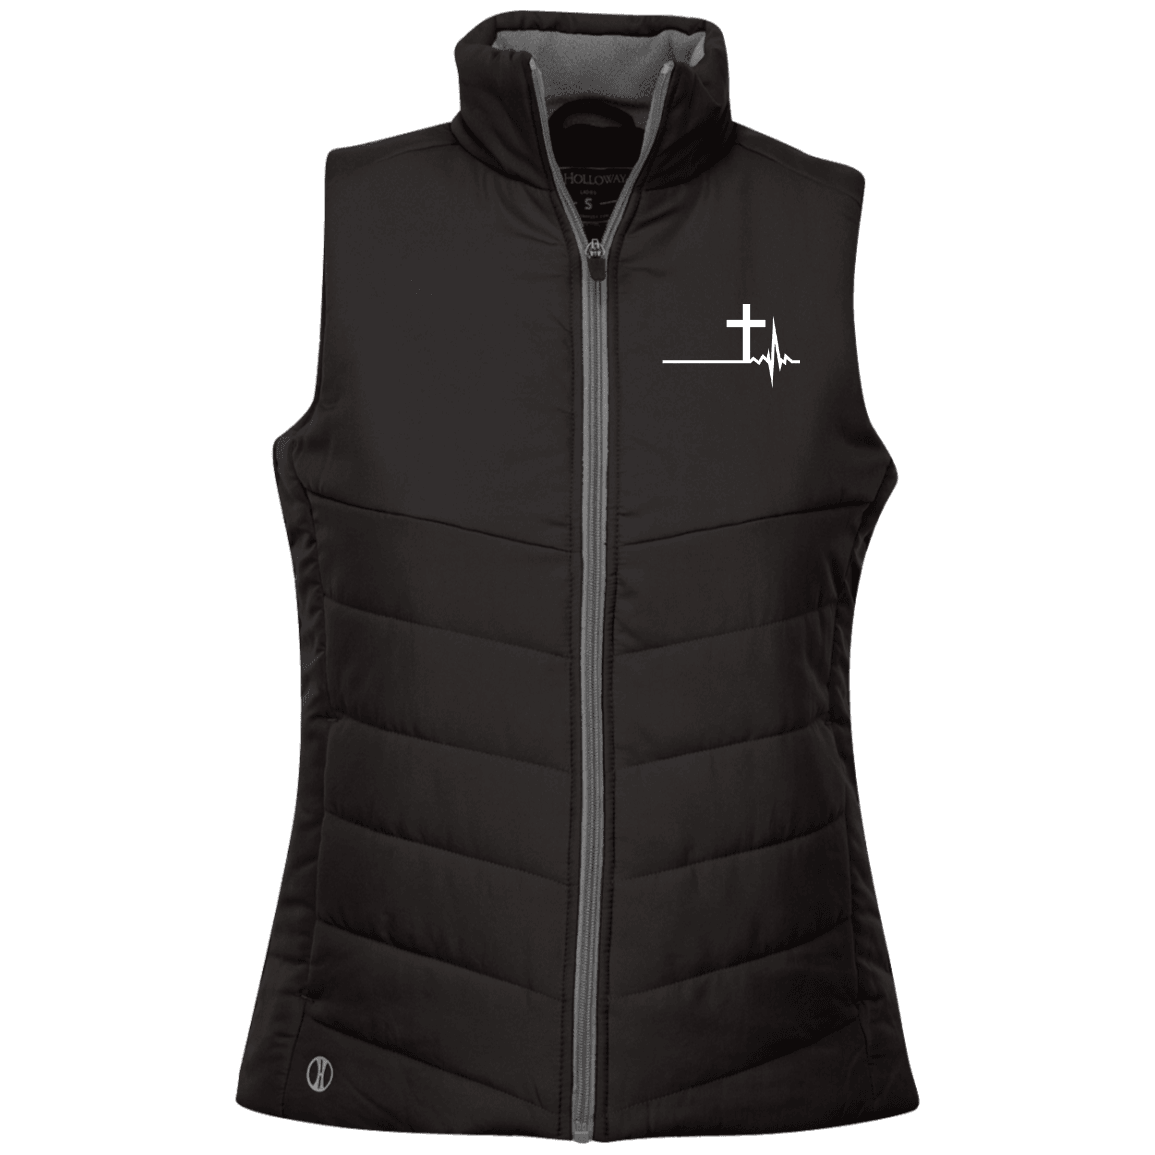 Designs by MyUtopia Shout Out:Cross Heartbeat Embroidered Holloway Ladies' Quilted Vest,X-Small / Black,Jackets